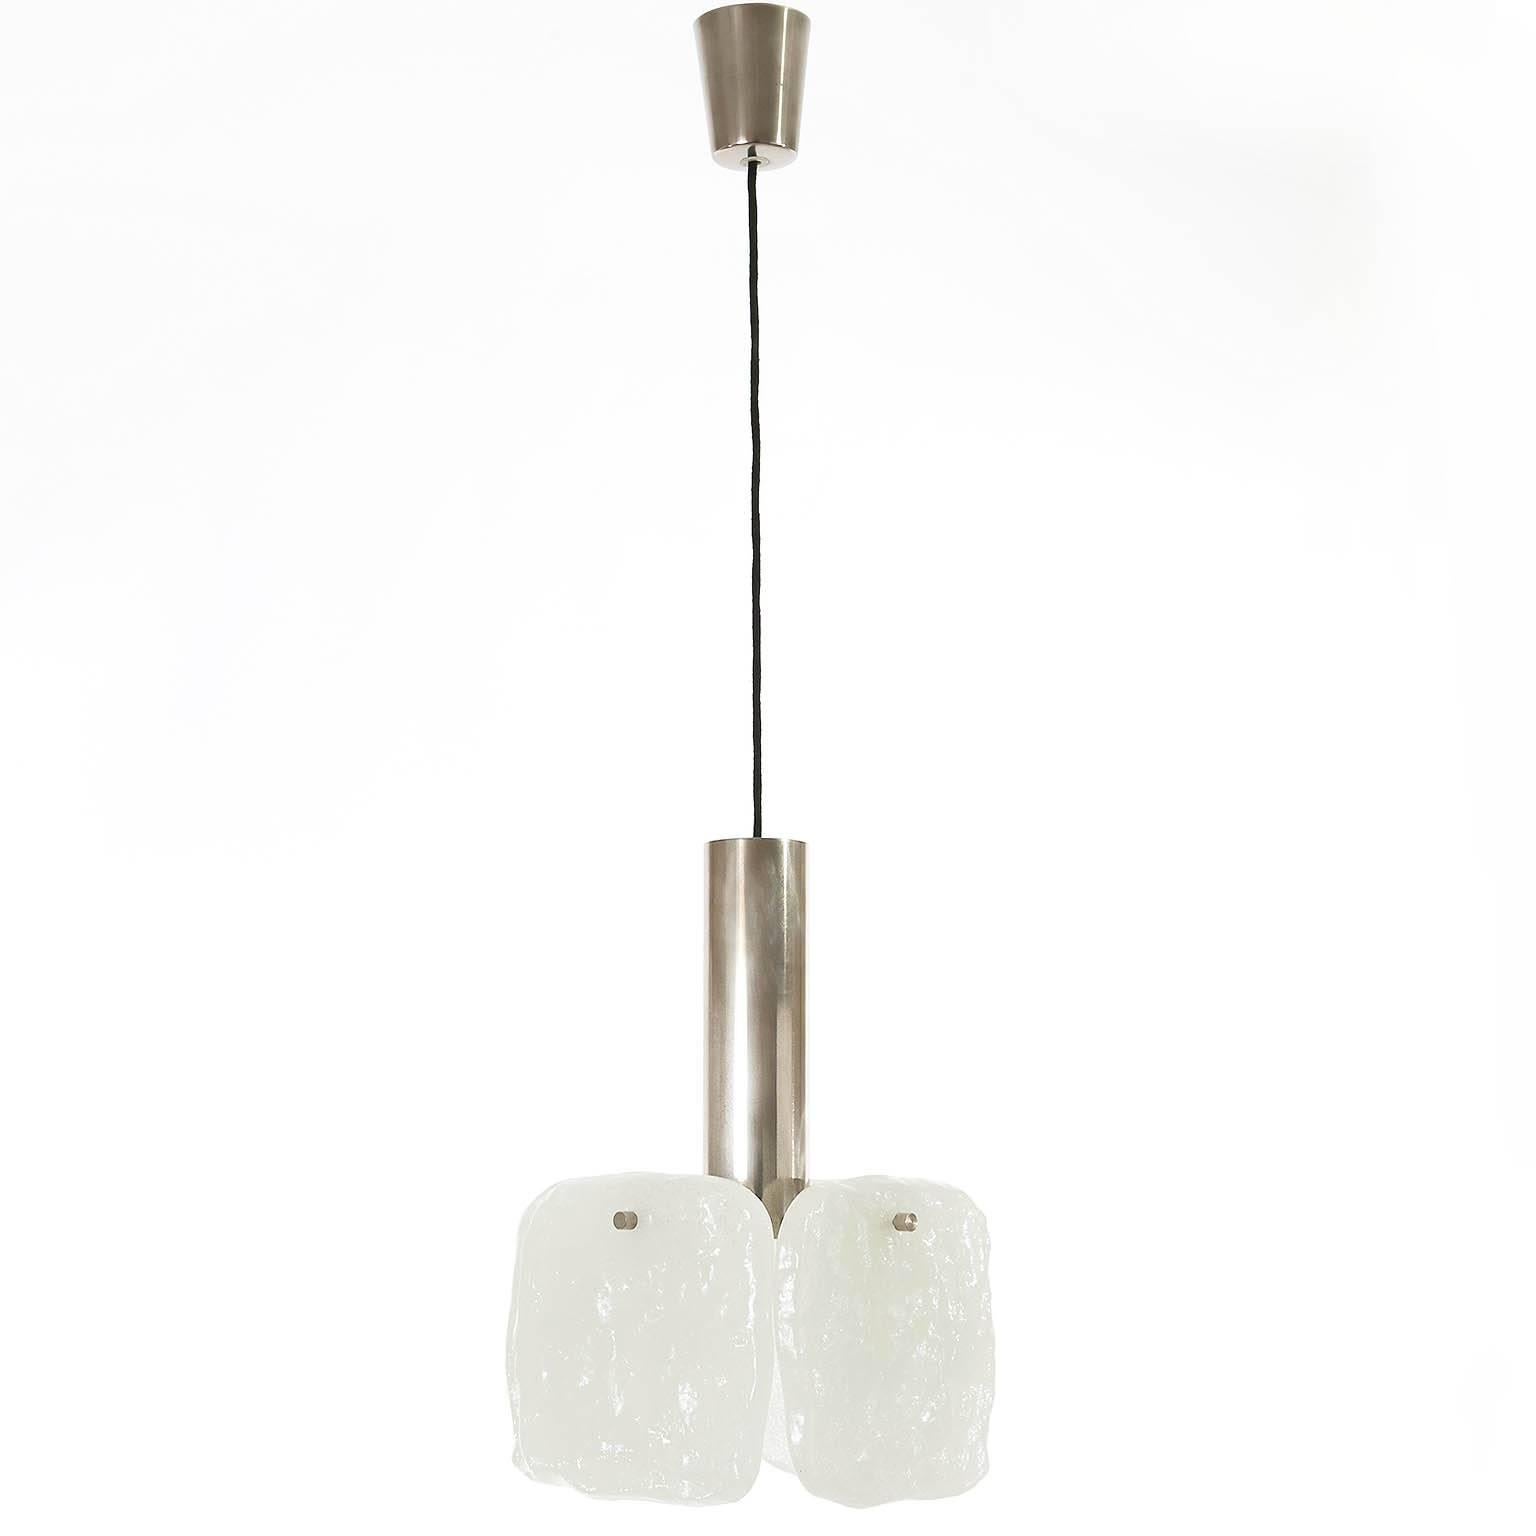 Mid-Century Modern One of Three Kalmar Pendant Lights, Ice Glass and Chrome, 1960s For Sale